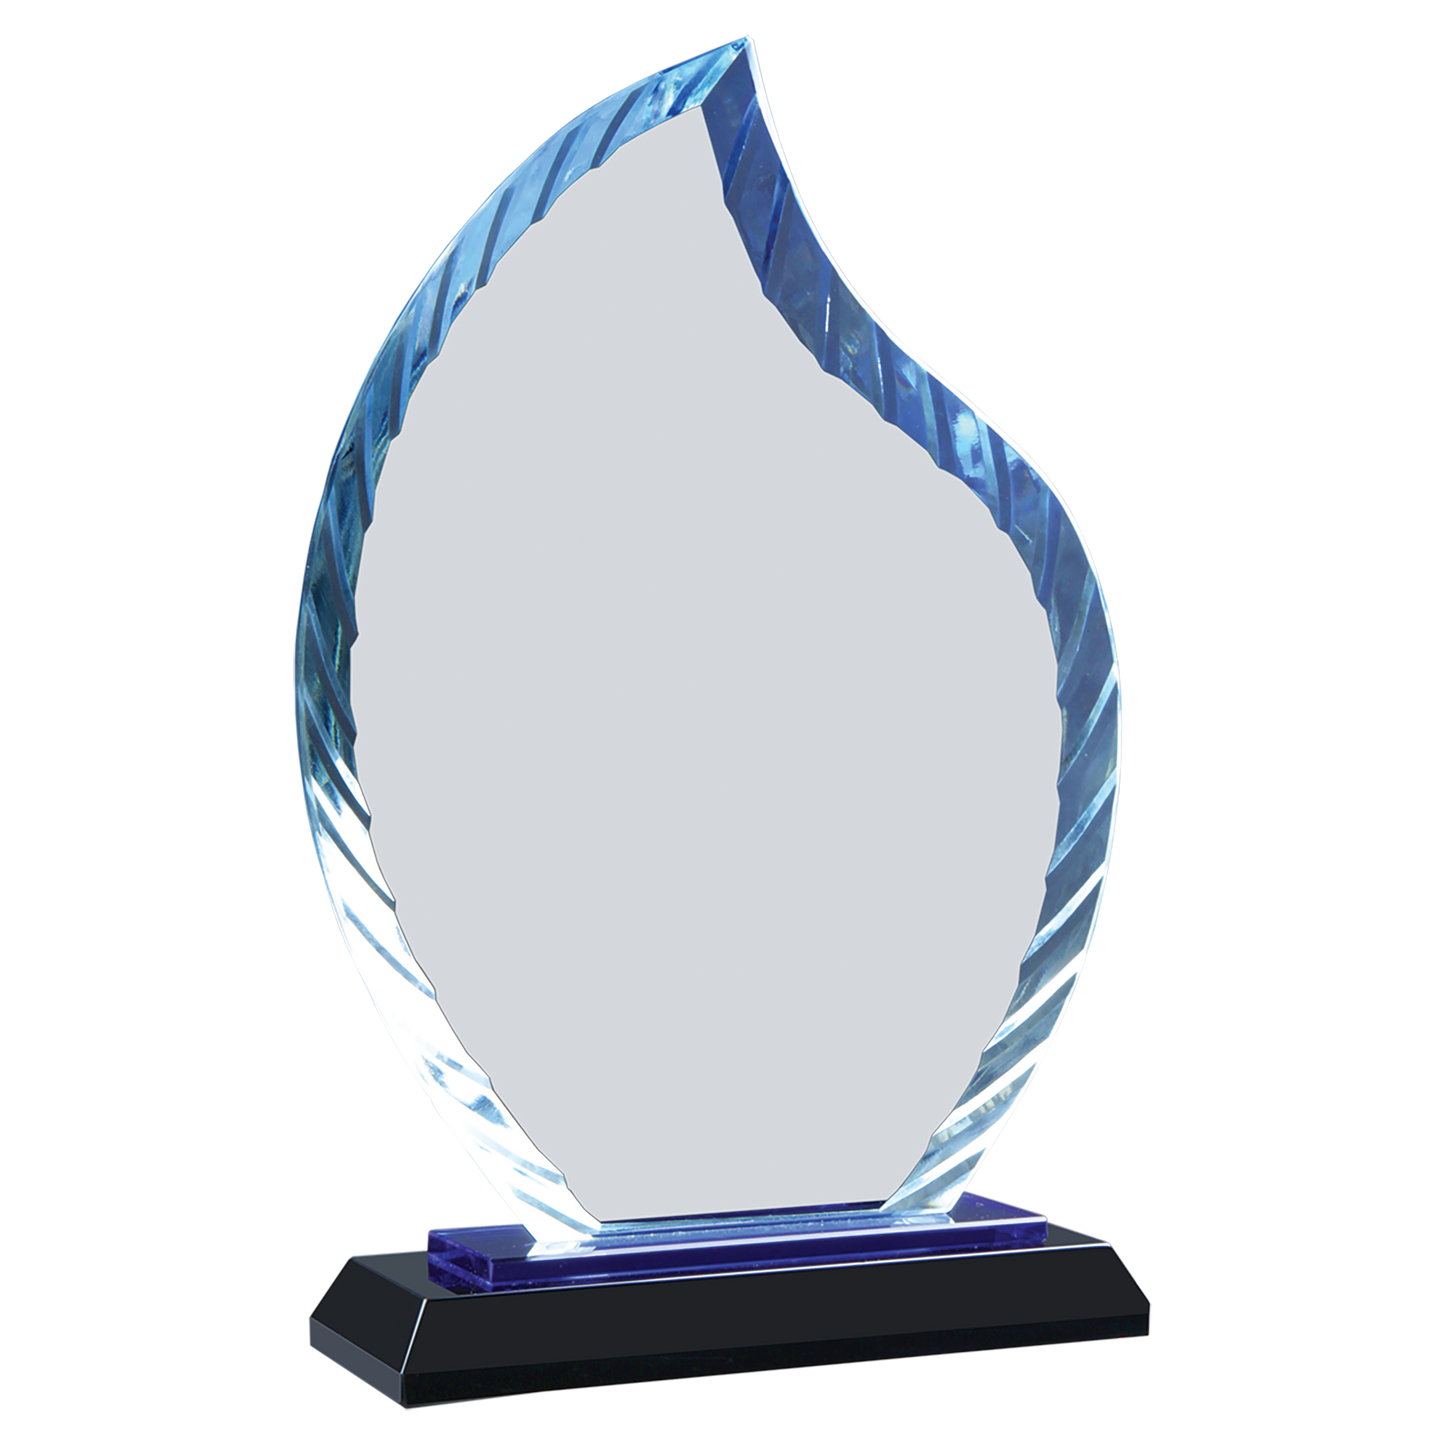 8" Flame Accent Glass on Blue & Black Base Corporate Awards - Glass Awards